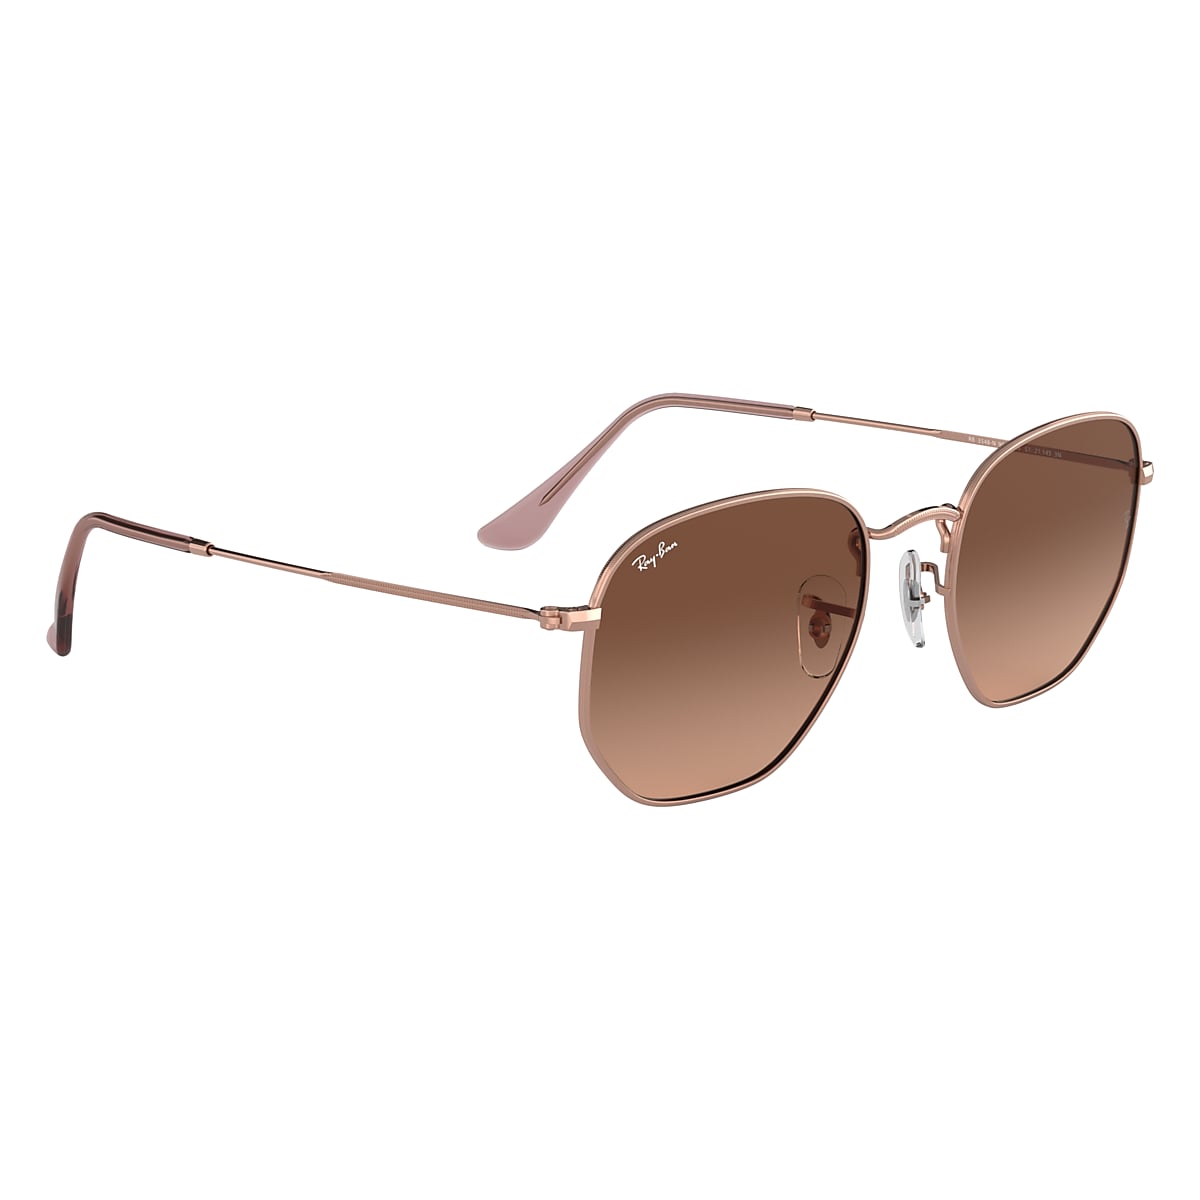 HEXAGONAL FLAT LENSES Sunglasses in Copper and Brown - RB3548N 